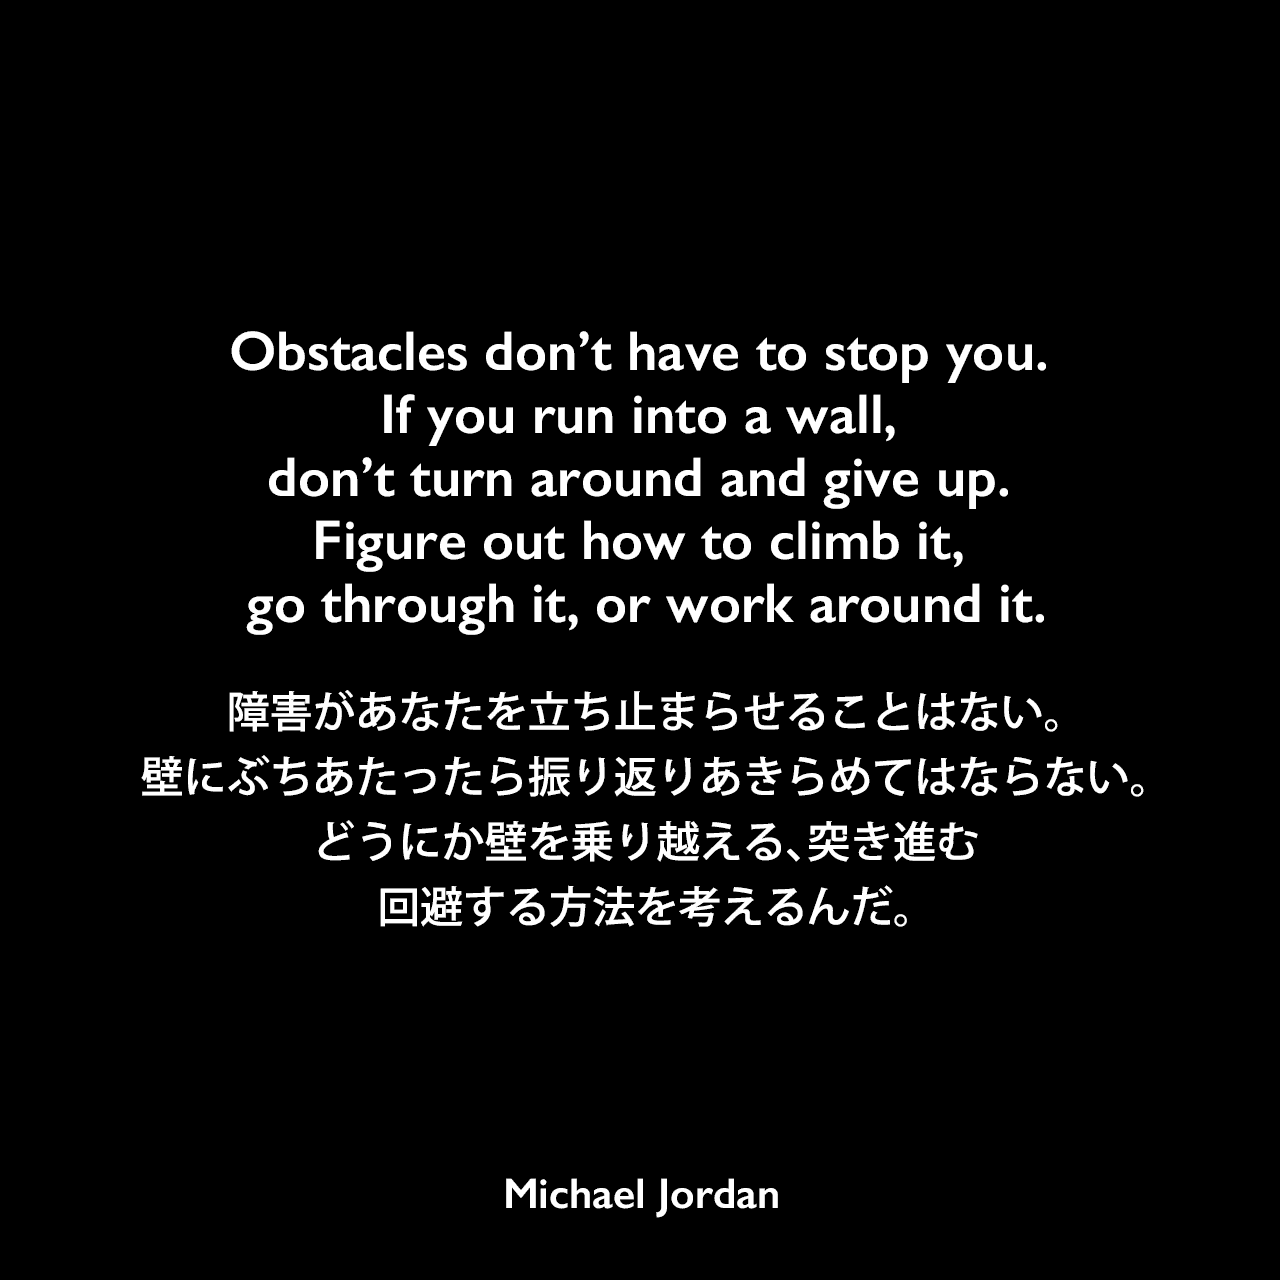 Obstacles don’t have to stop you. If you run into a wall, don’t turn around and give up. Figure out how to climb it, go through it, or work around it.障害があなたを立ち止まらせることはない。壁にぶちあたったら振り返りあきらめてはならない。どうにか壁を乗り越える、突き進む、回避する方法を考えるんだ。Michael Jordan